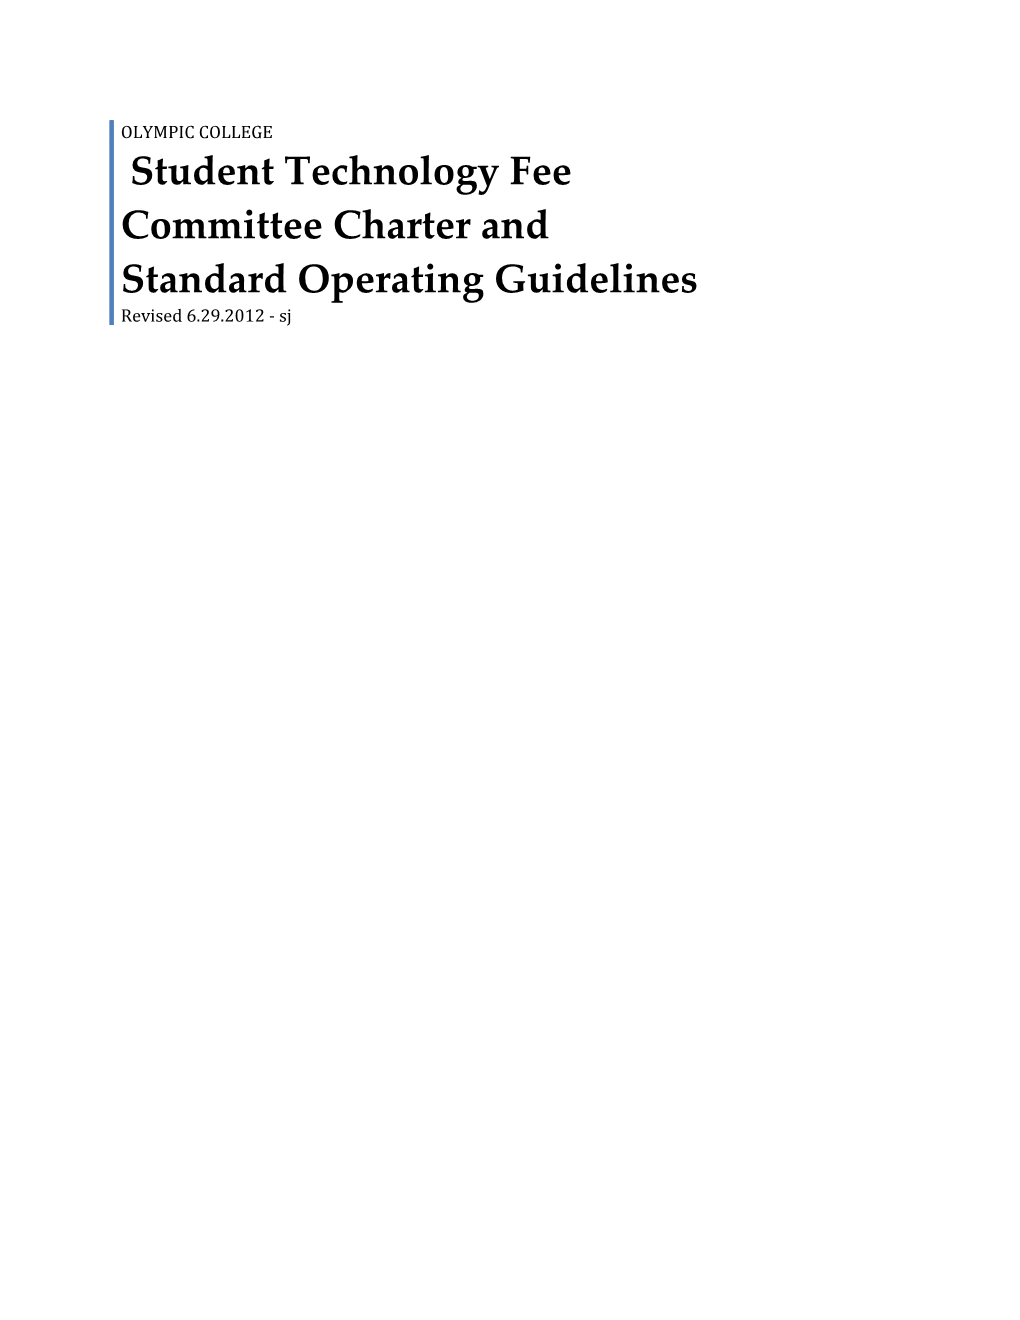 Student Technology Fee Committee Charter and Standard Operating Guidelines